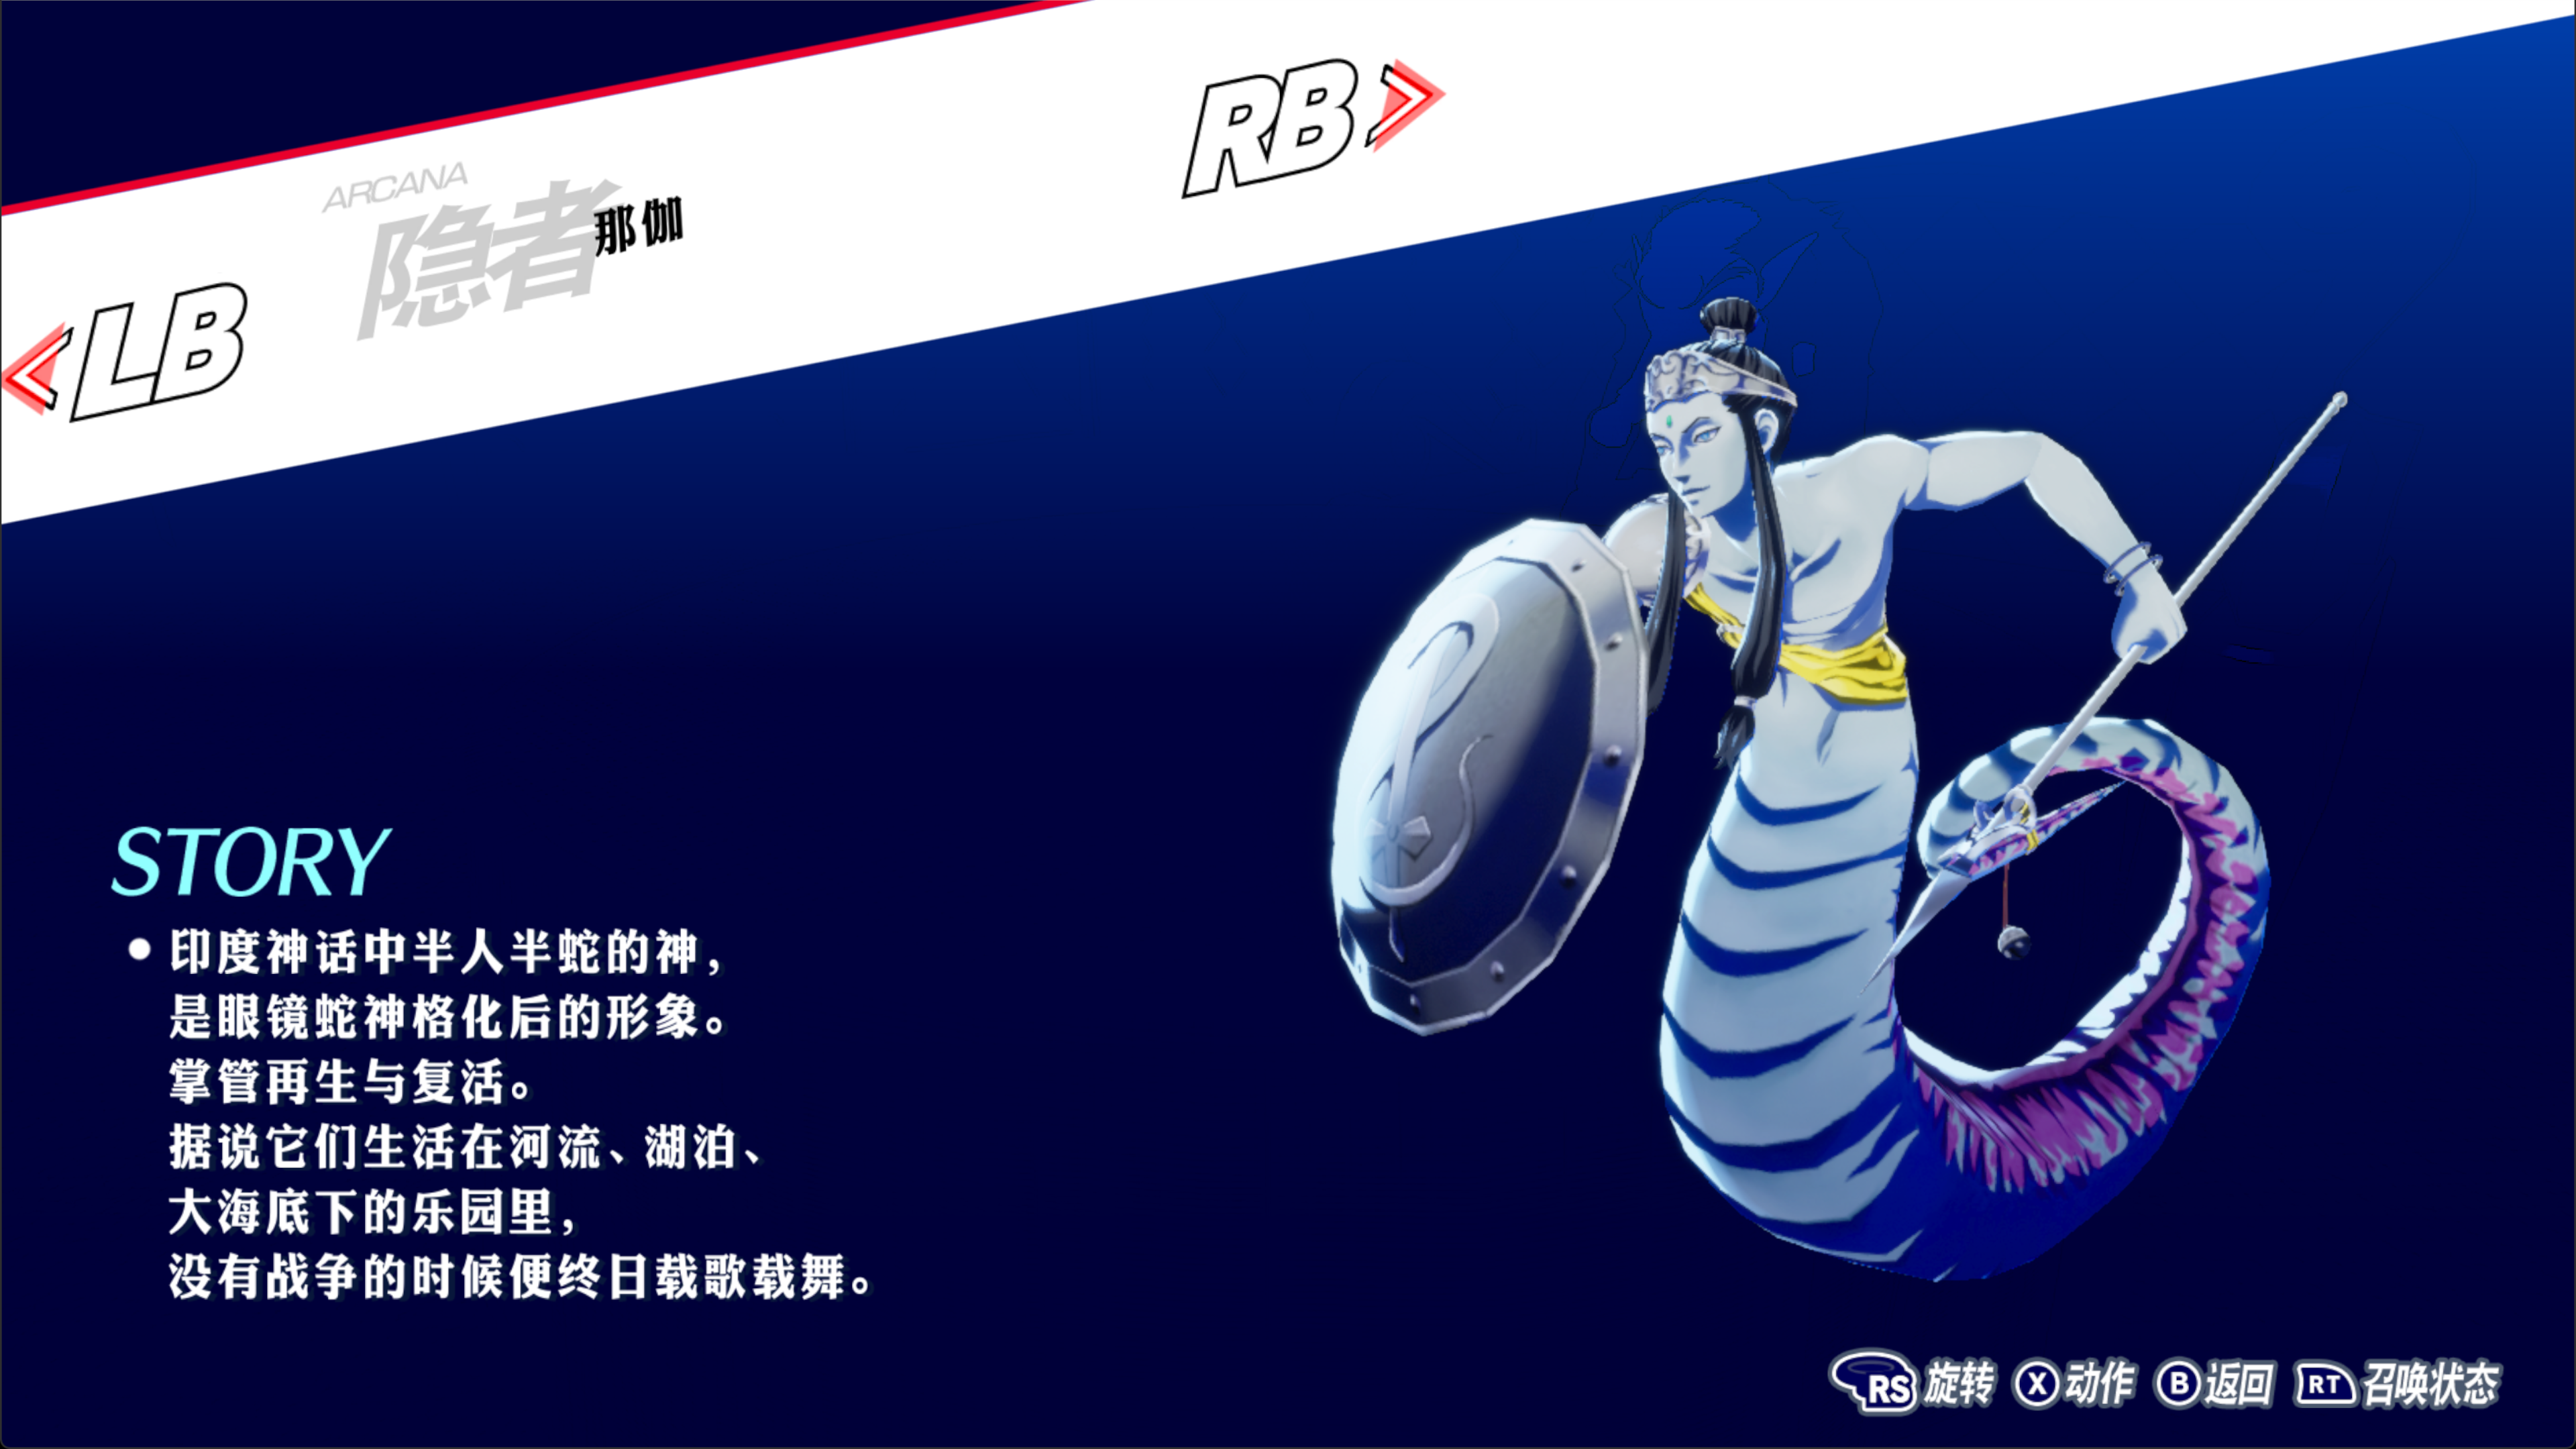 P3R 那伽图鉴.png